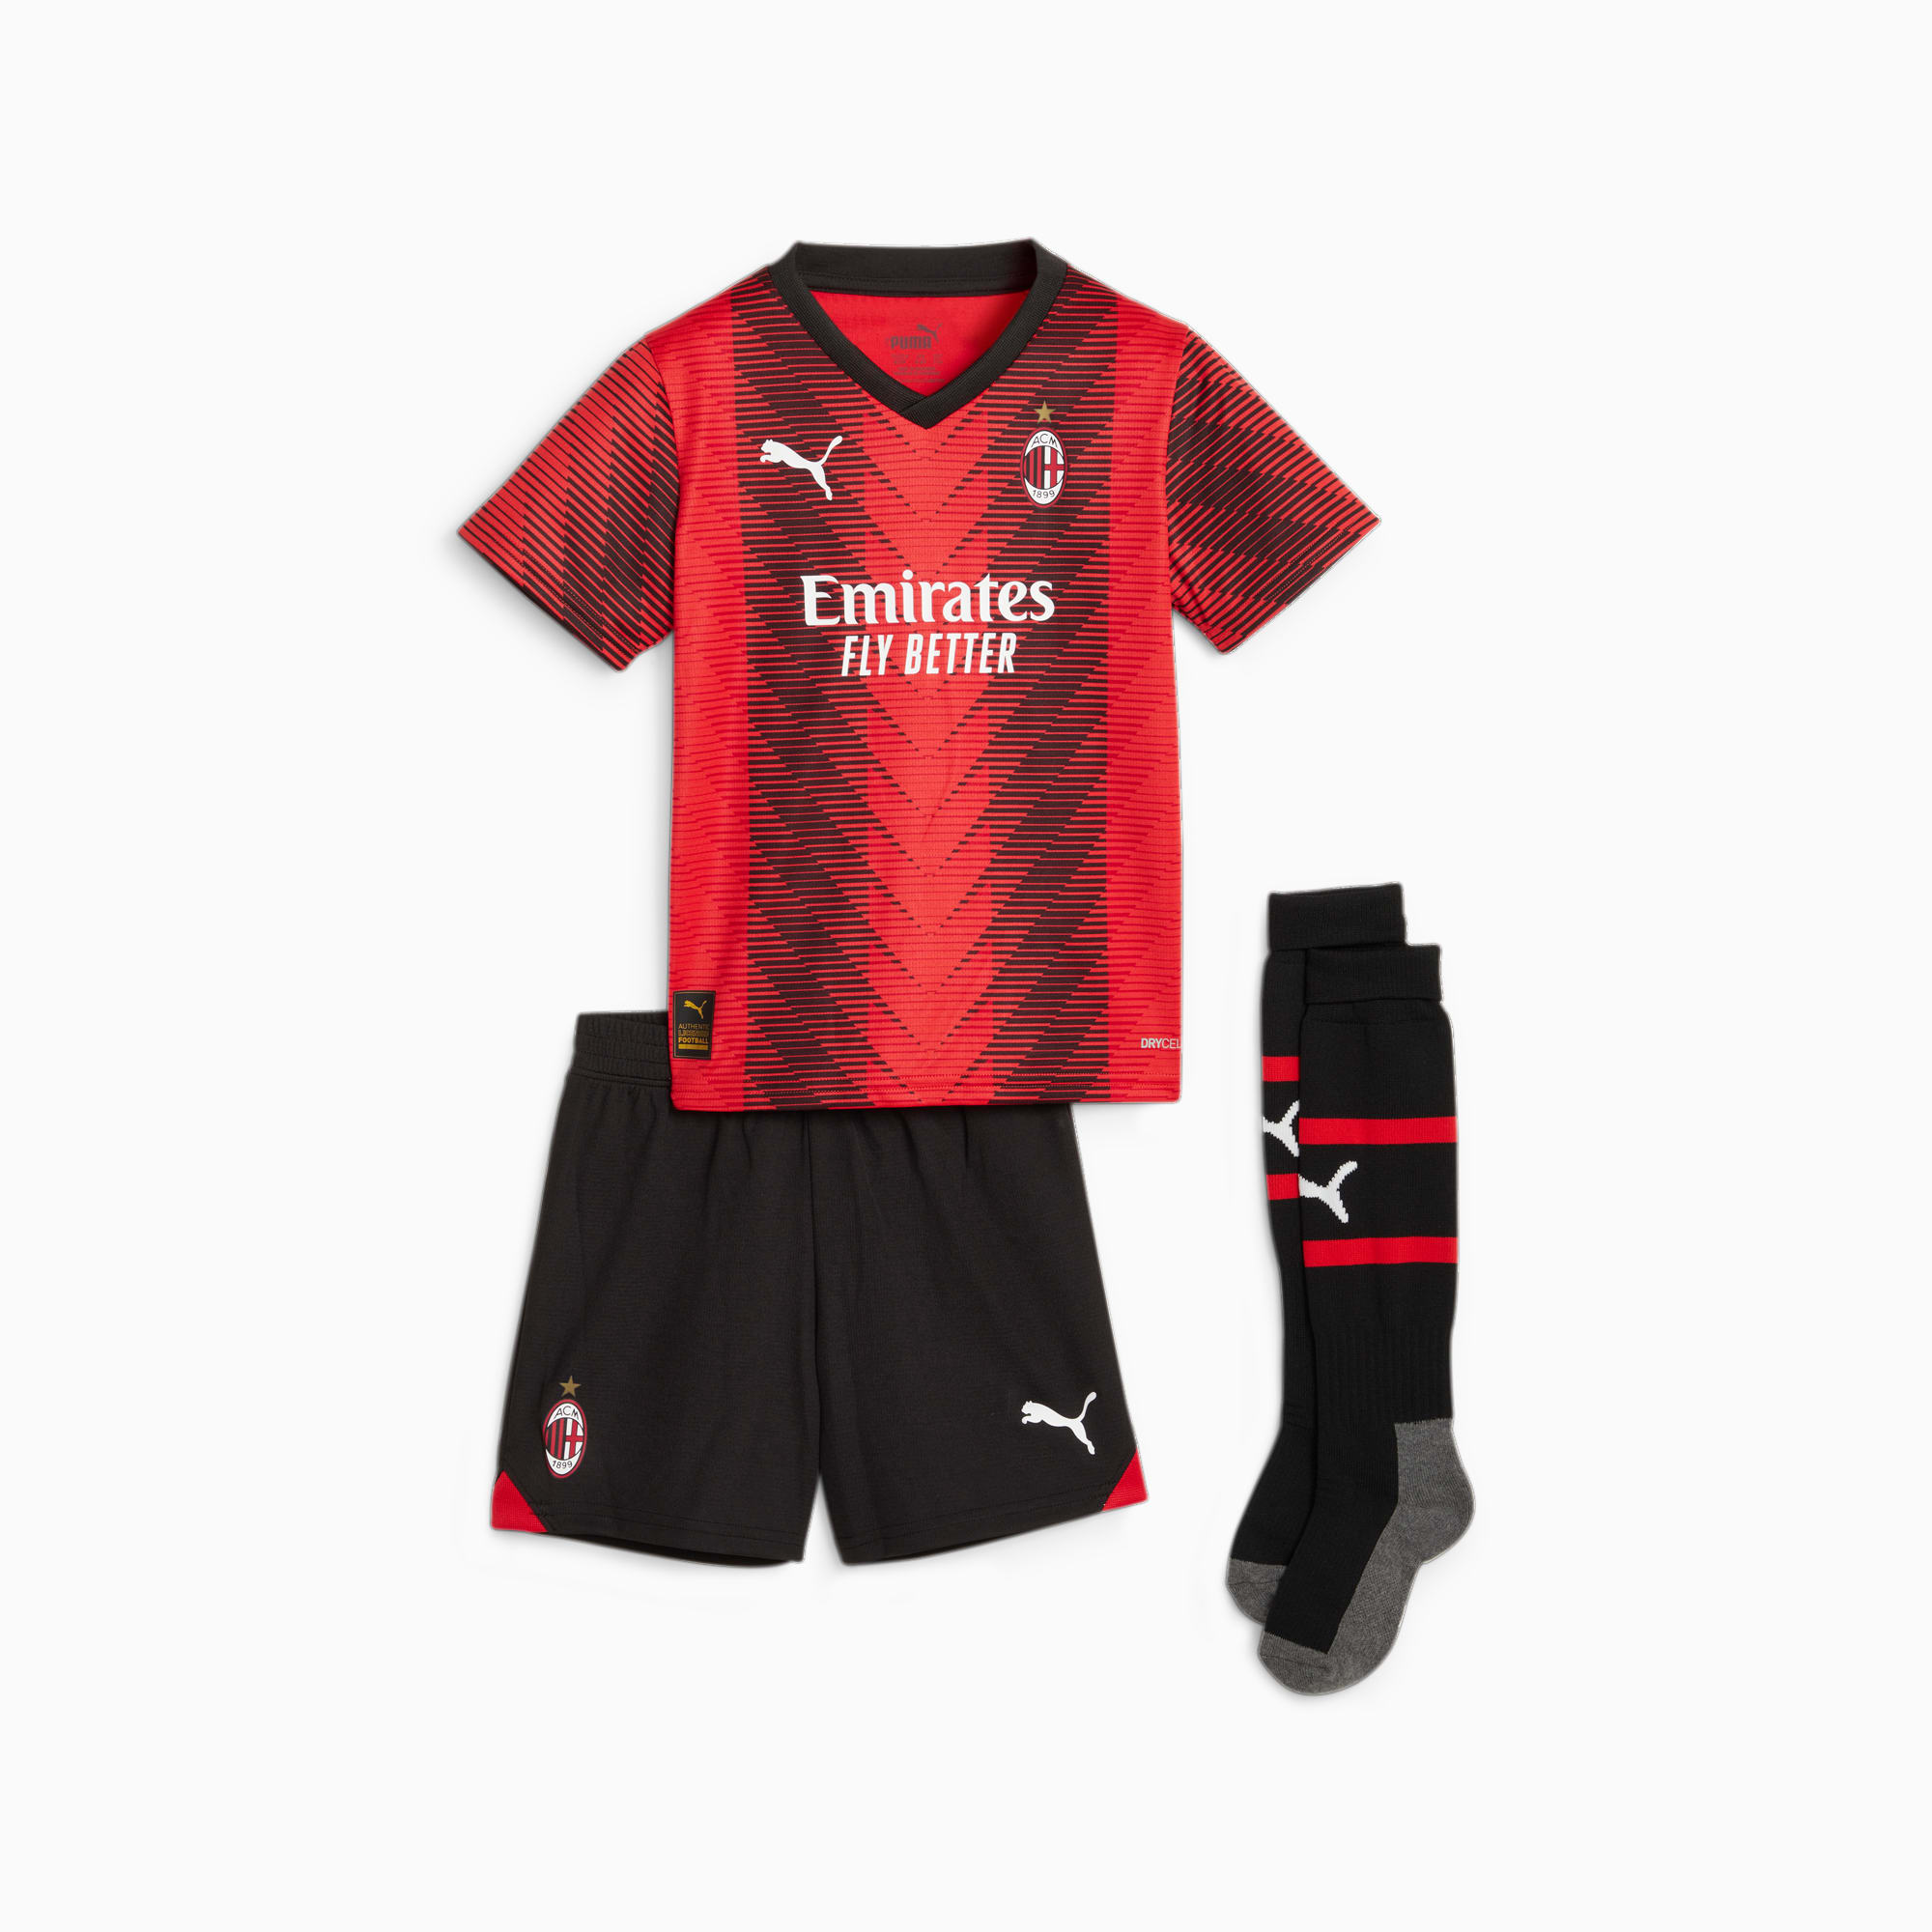 PUMA A.C. Milan 23/24 Home Mini Kit, For All Time Red/Black, Size 92, Clothing